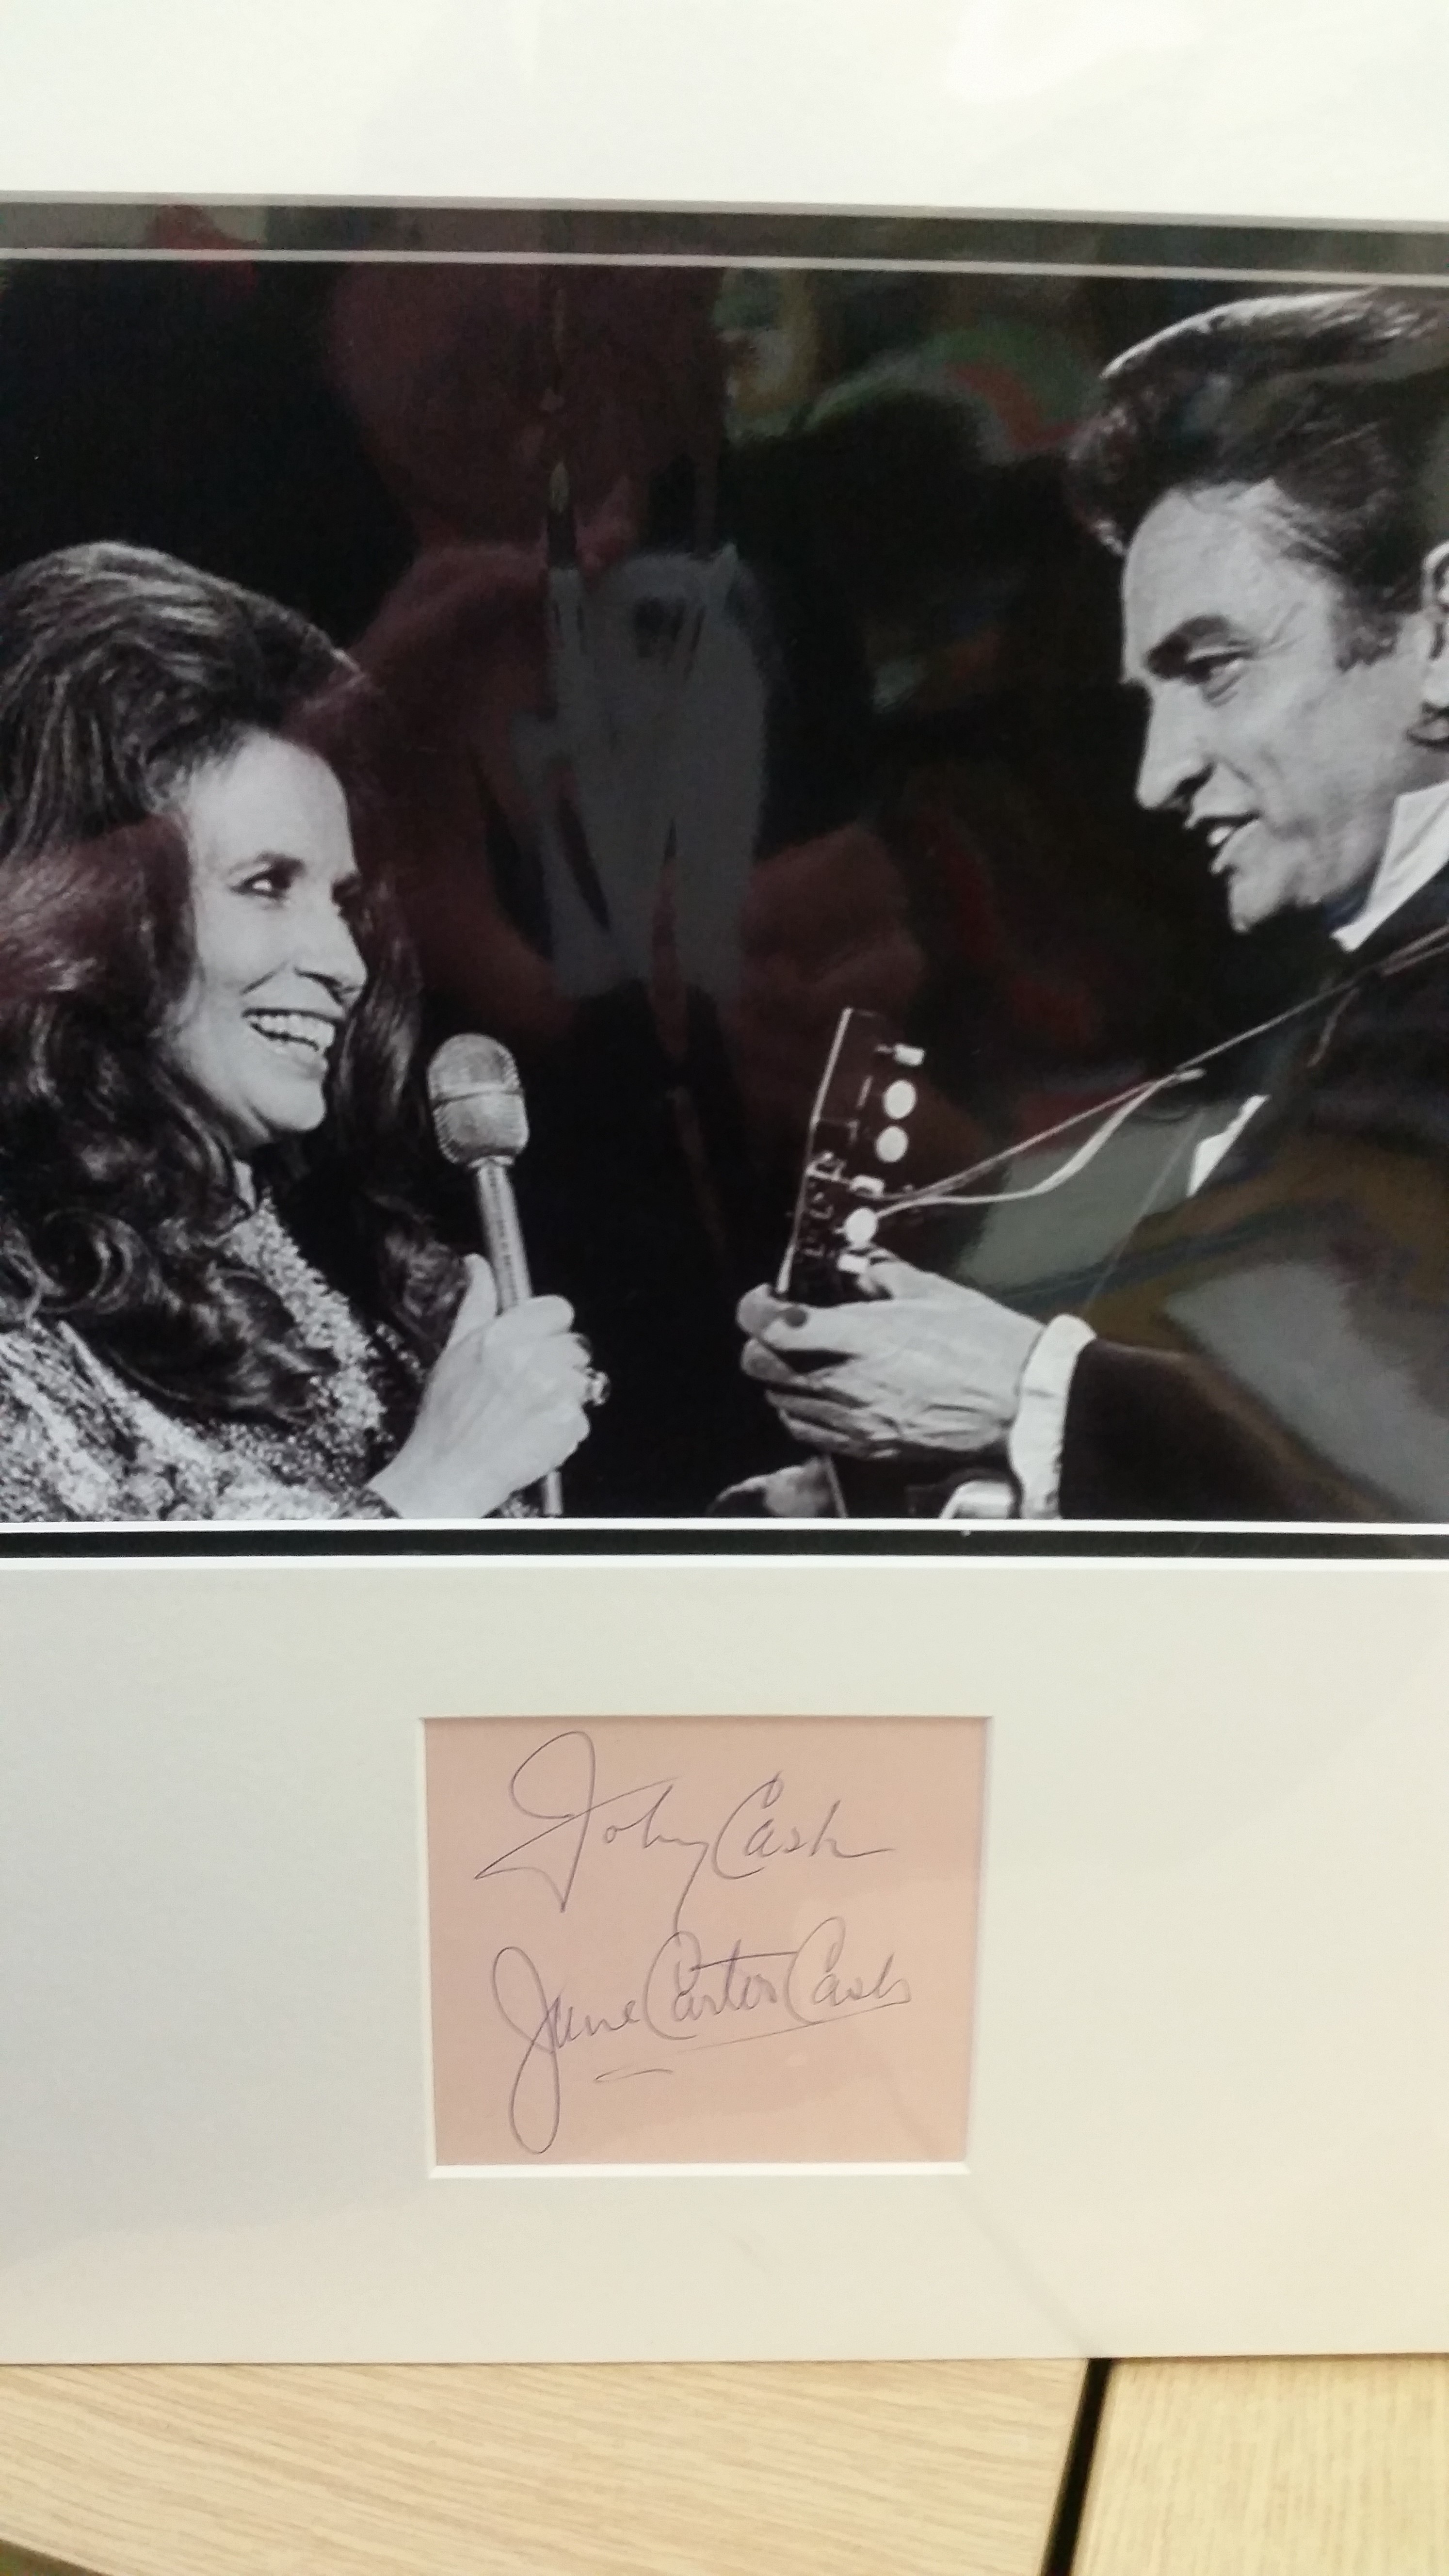 POP MUSIC, signed album page by Johnny Cash & June Carter Cash, 4 x 3.5, overmounted beneath photo